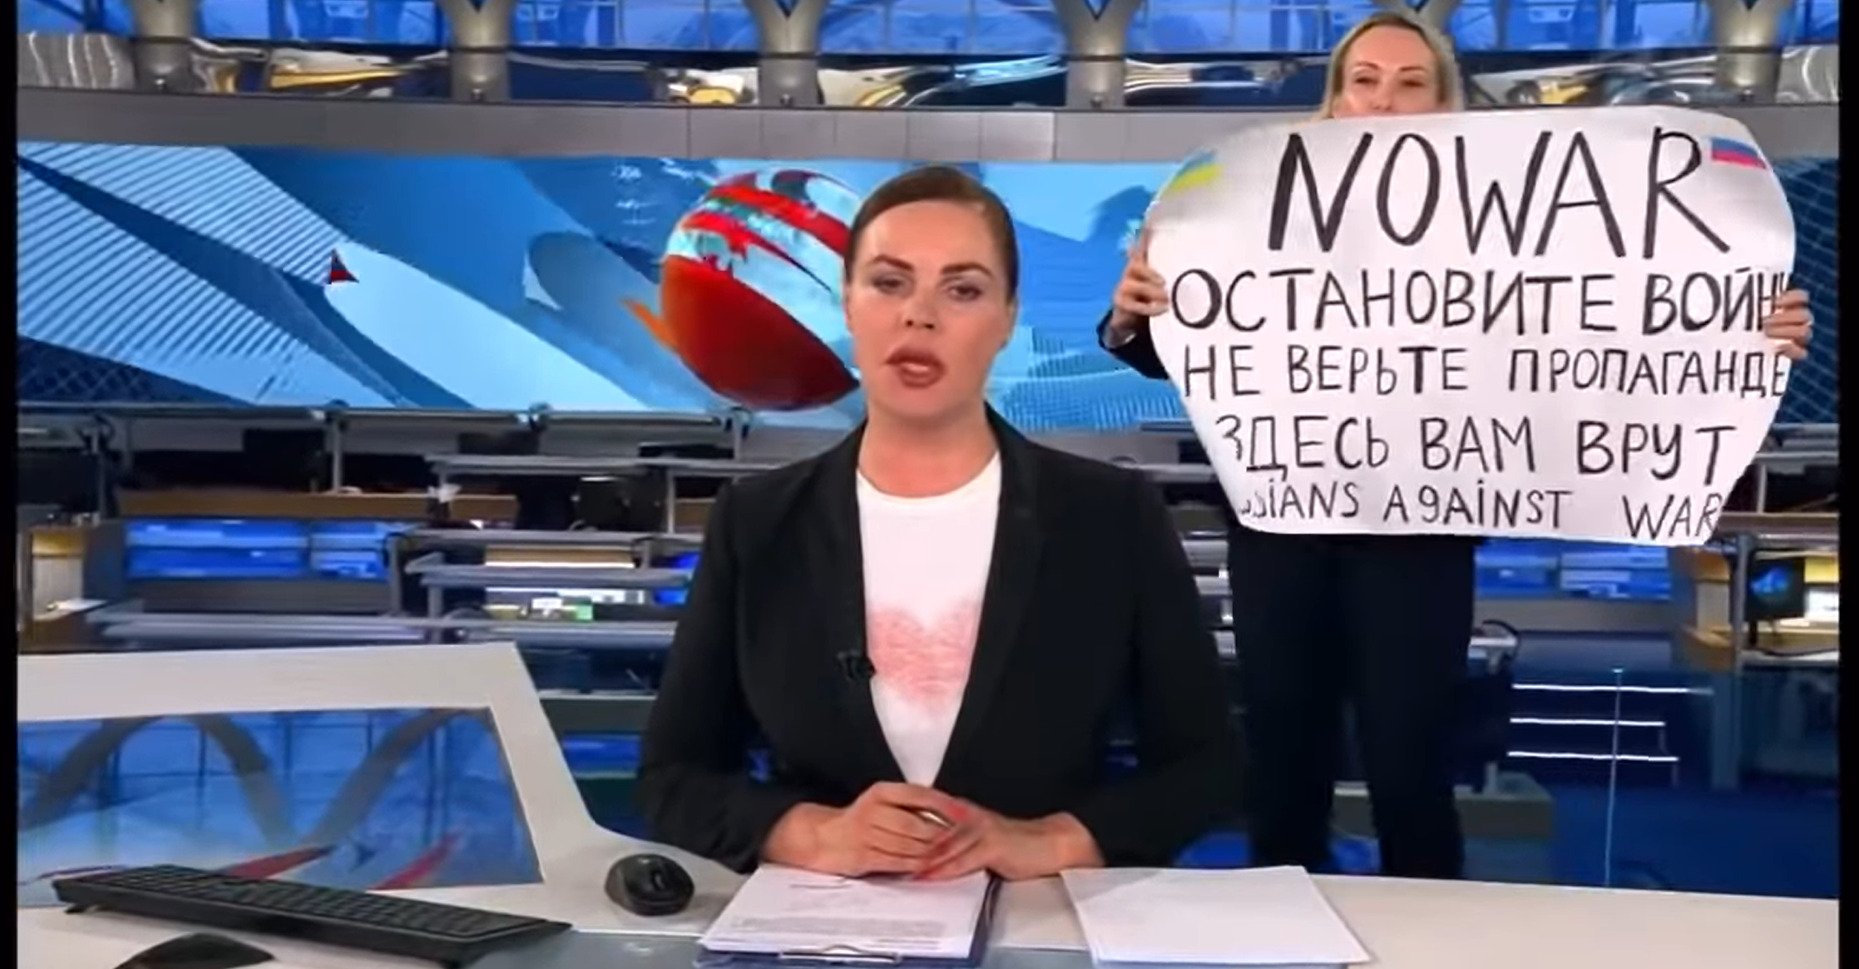 Russia: Protesting live on TV is an act of great courage, not a crime